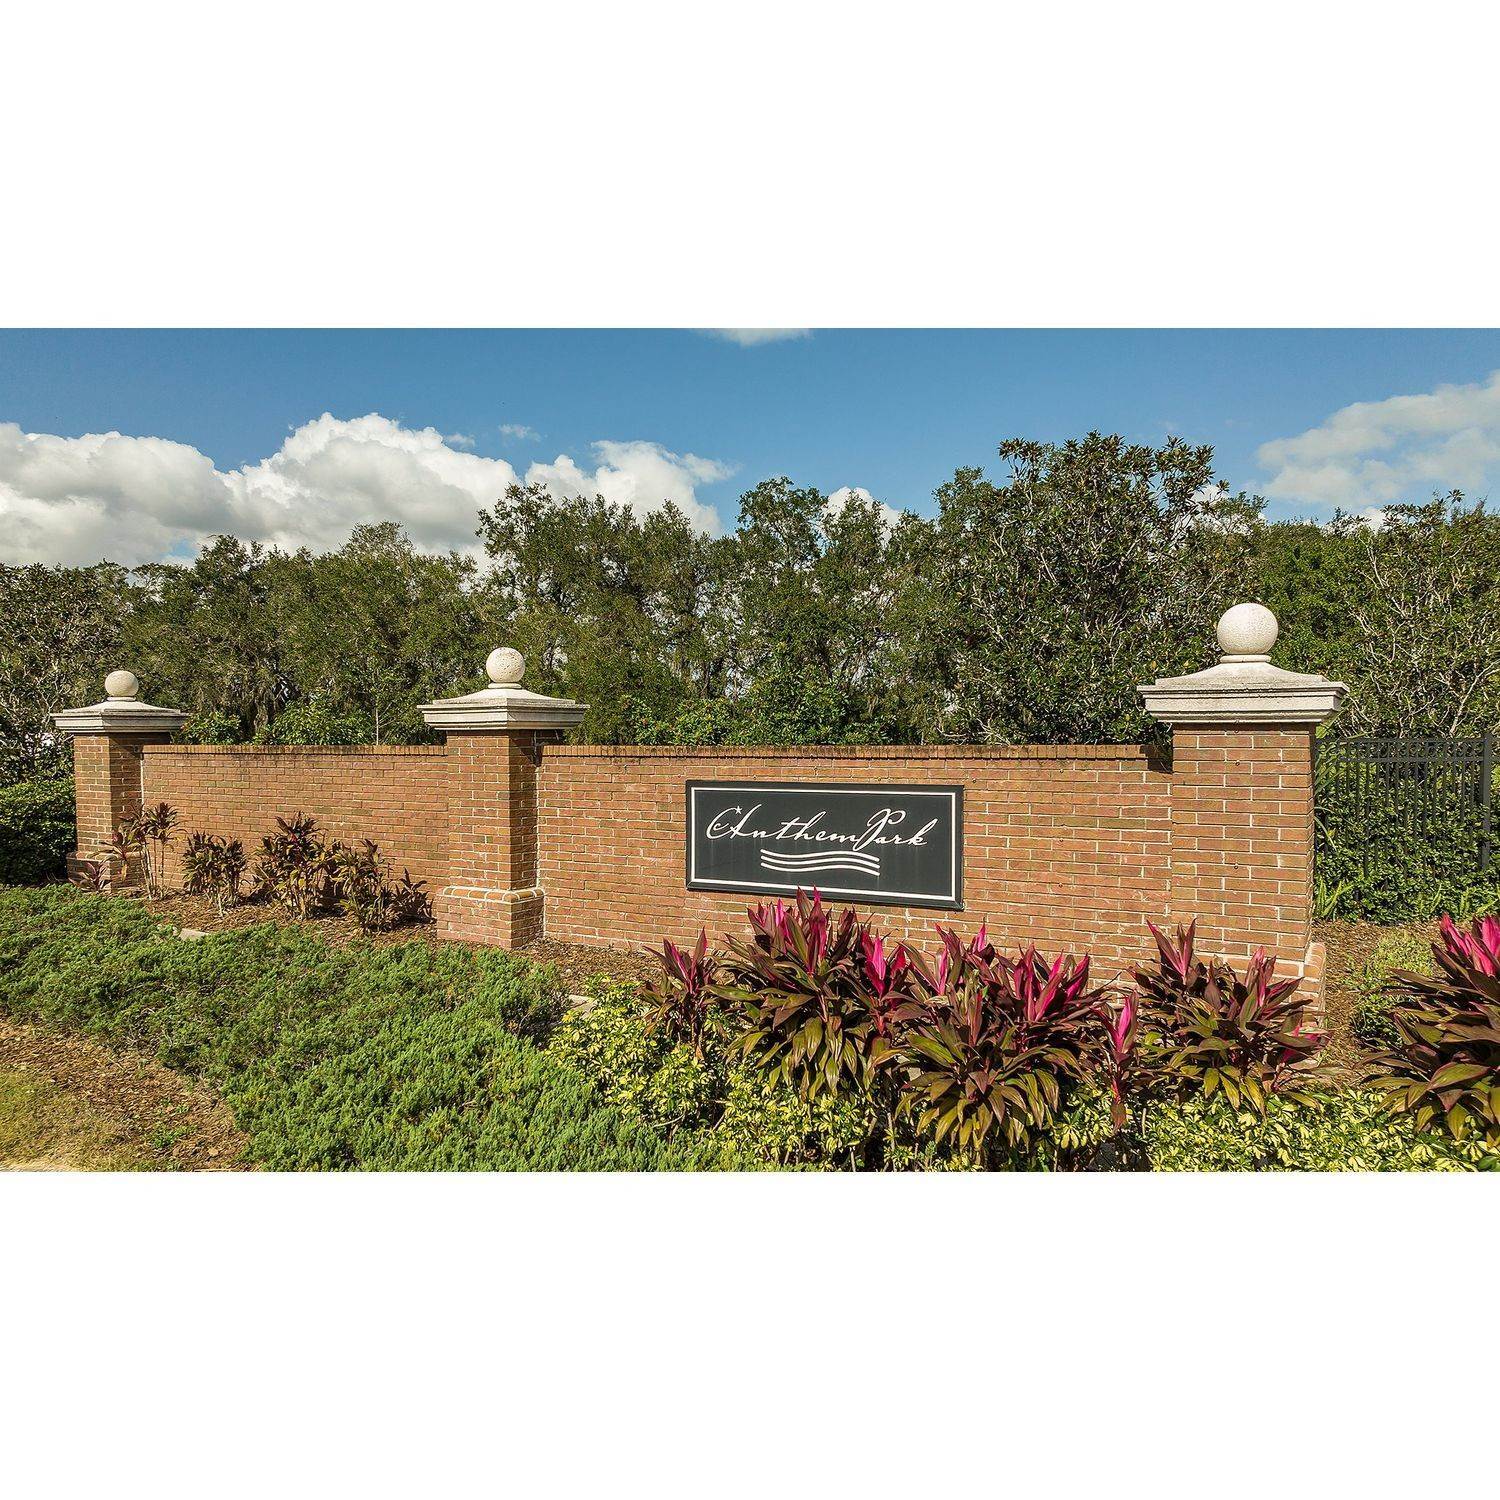 The Townhomes at Anthem Park building at 4590 Calvary Way, St. Cloud, FL 34769